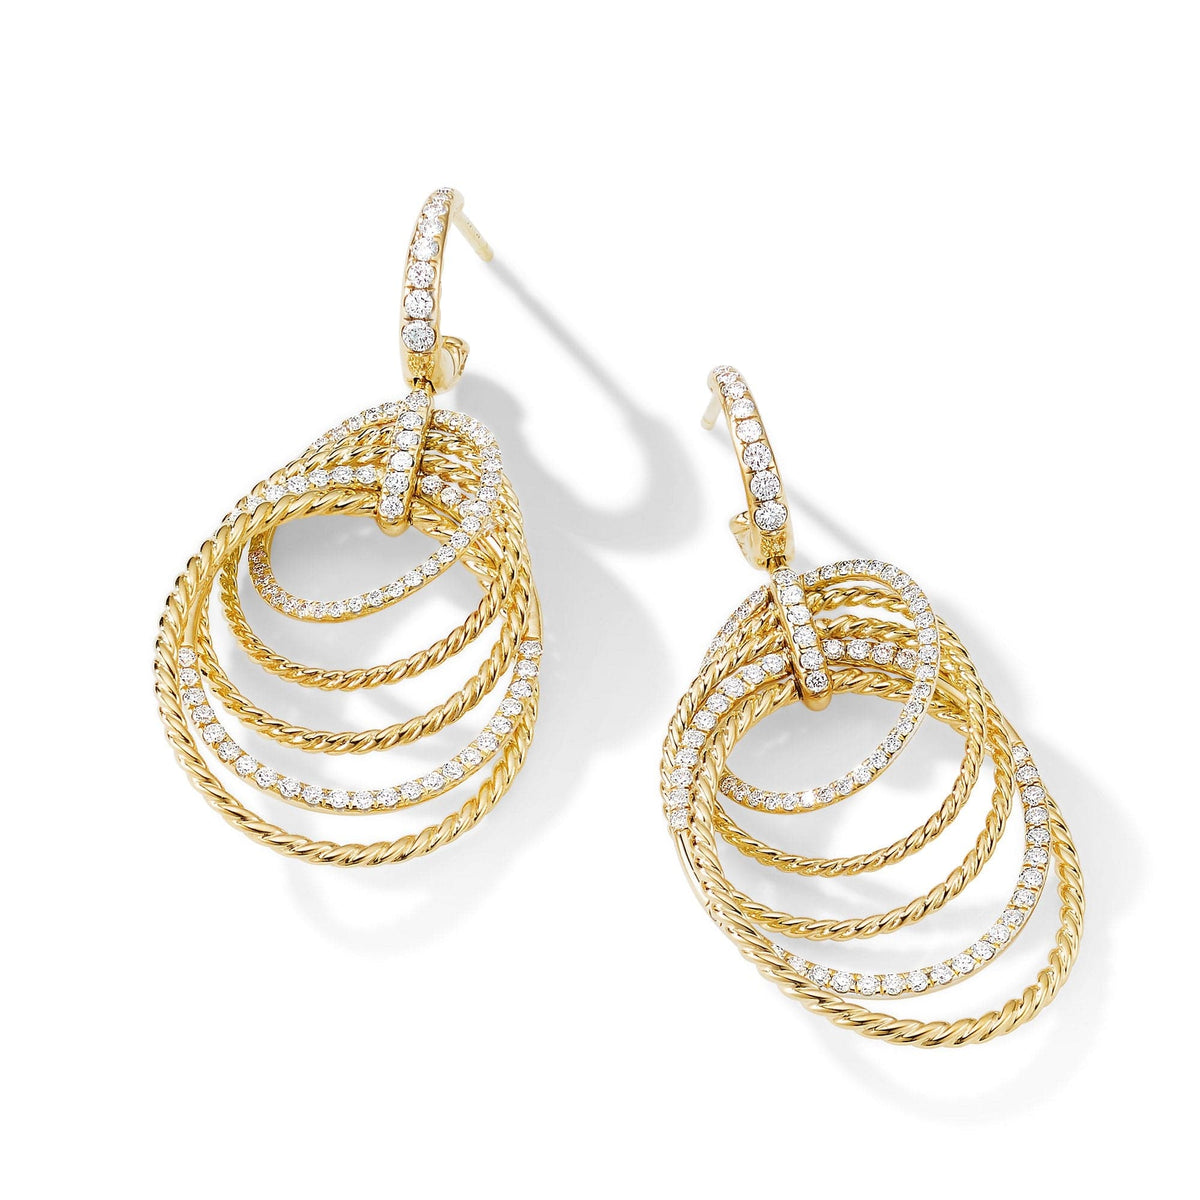 DY Origami Drop Earrings in 18K Yellow Gold with Pavé Diamonds